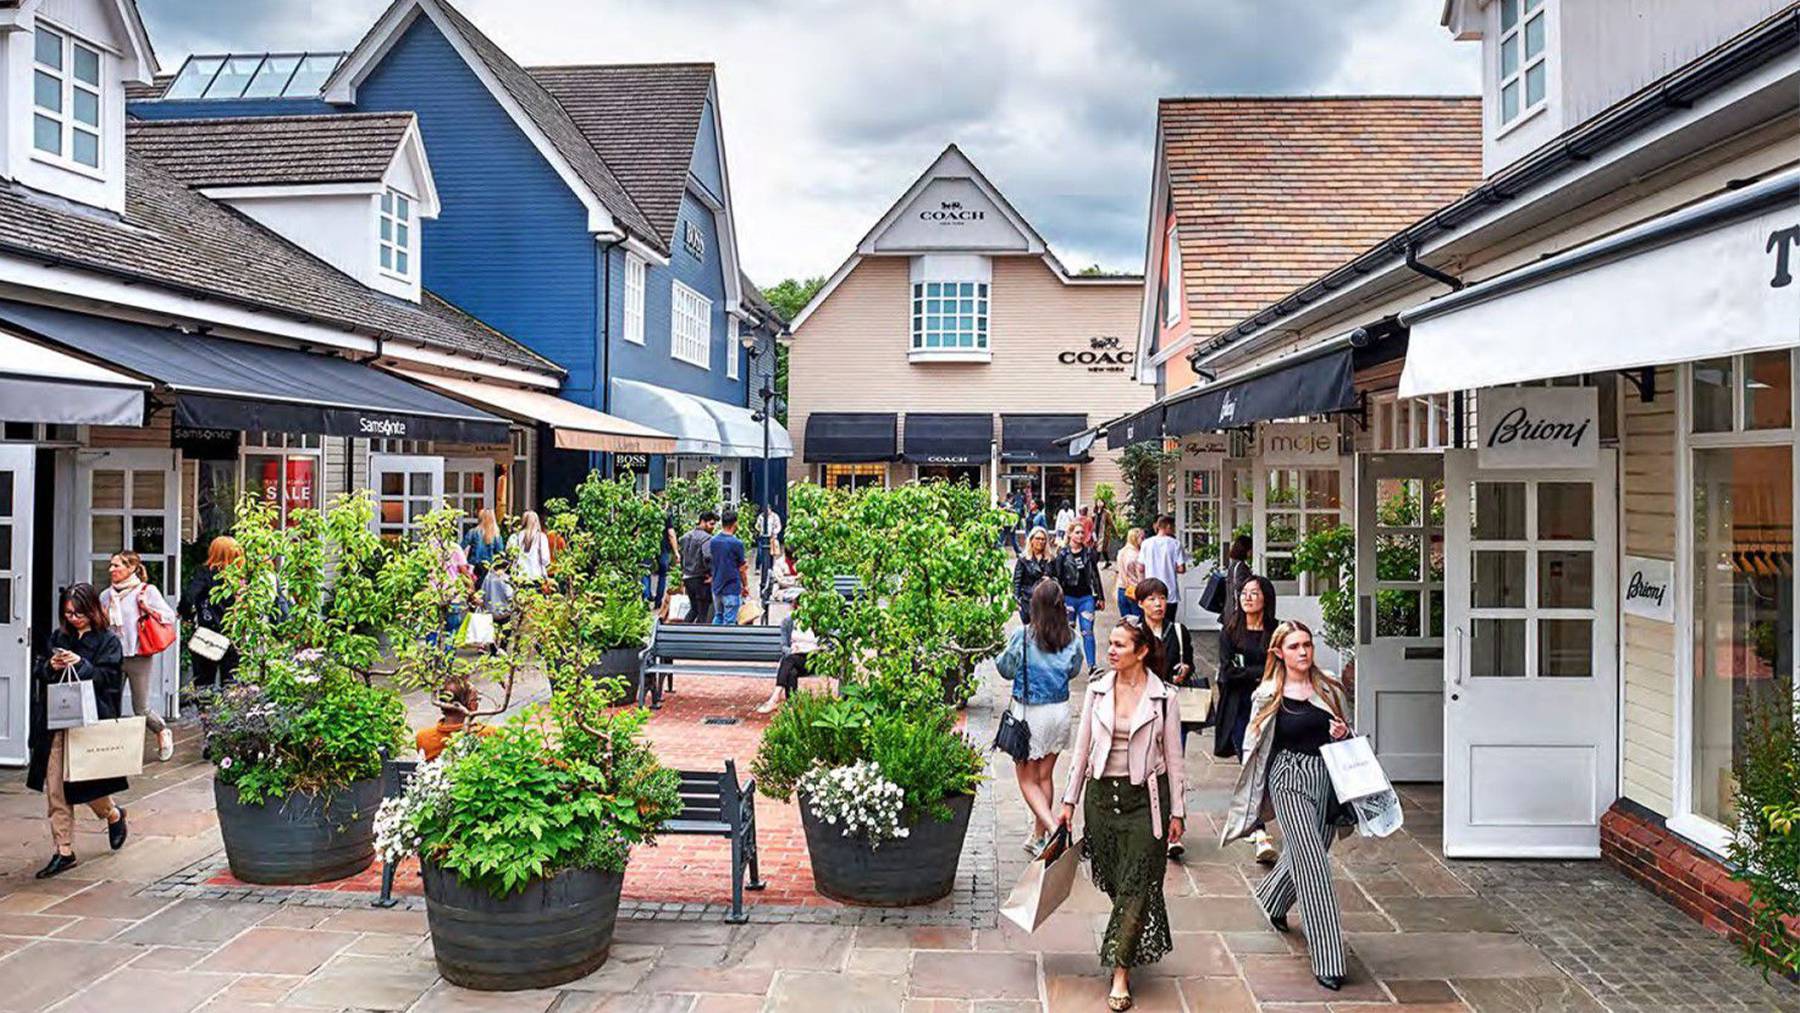 Value Retail's Bicester Shopping Village near Heathrow Airport in the UK.